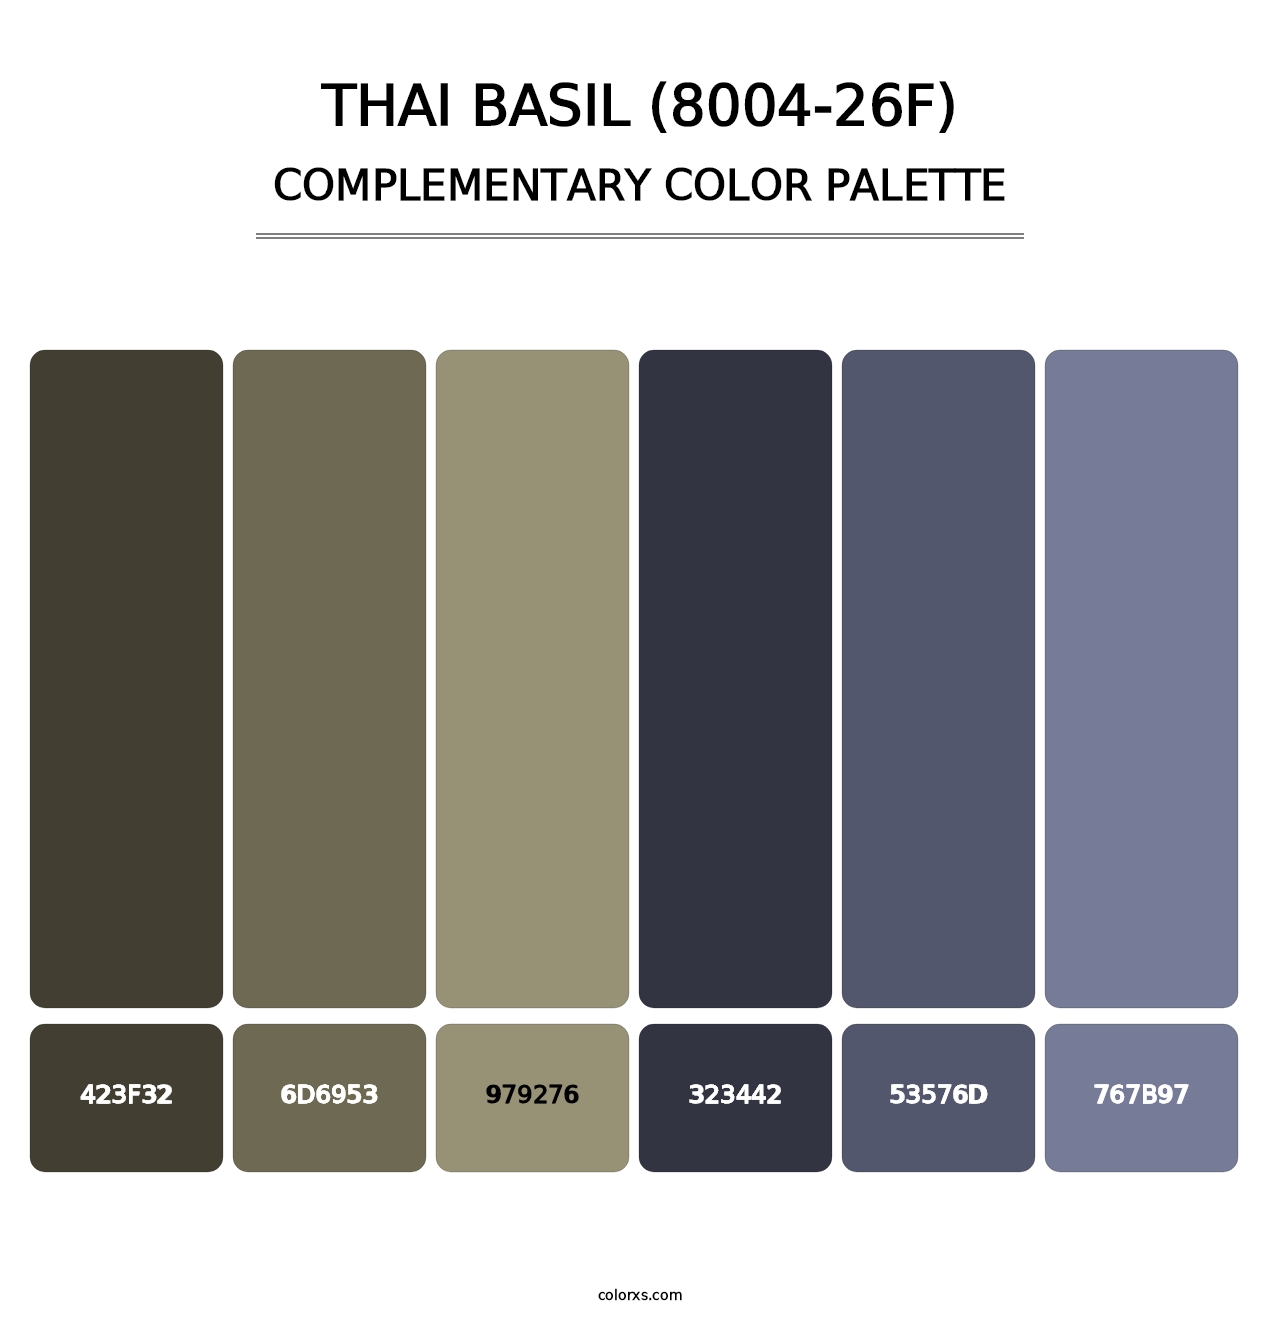 Thai Basil (8004-26F) - Complementary Color Palette